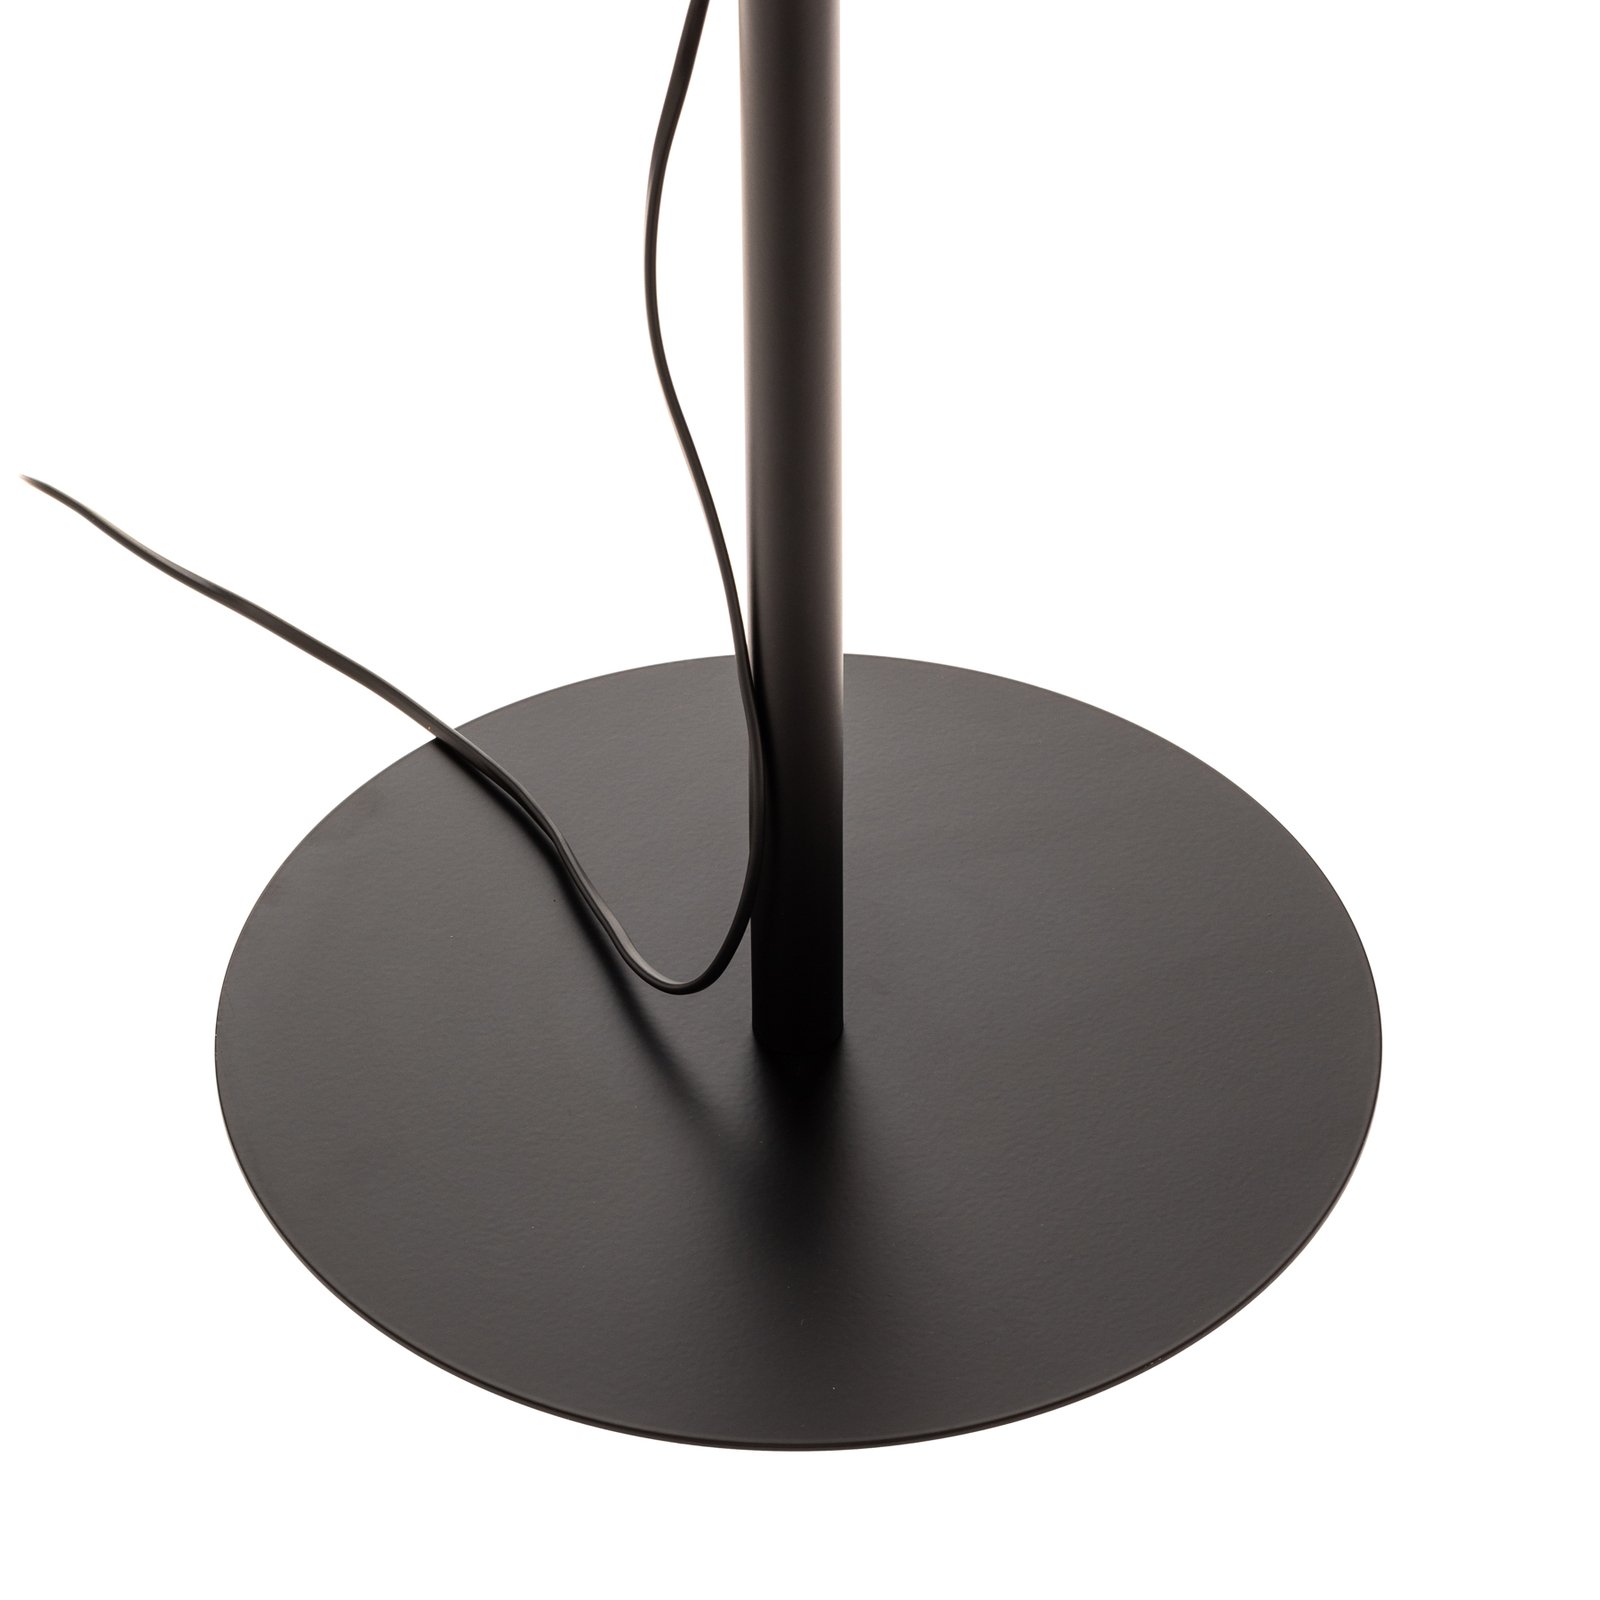 Arden floor lamp without a lampshade, black 138 cm